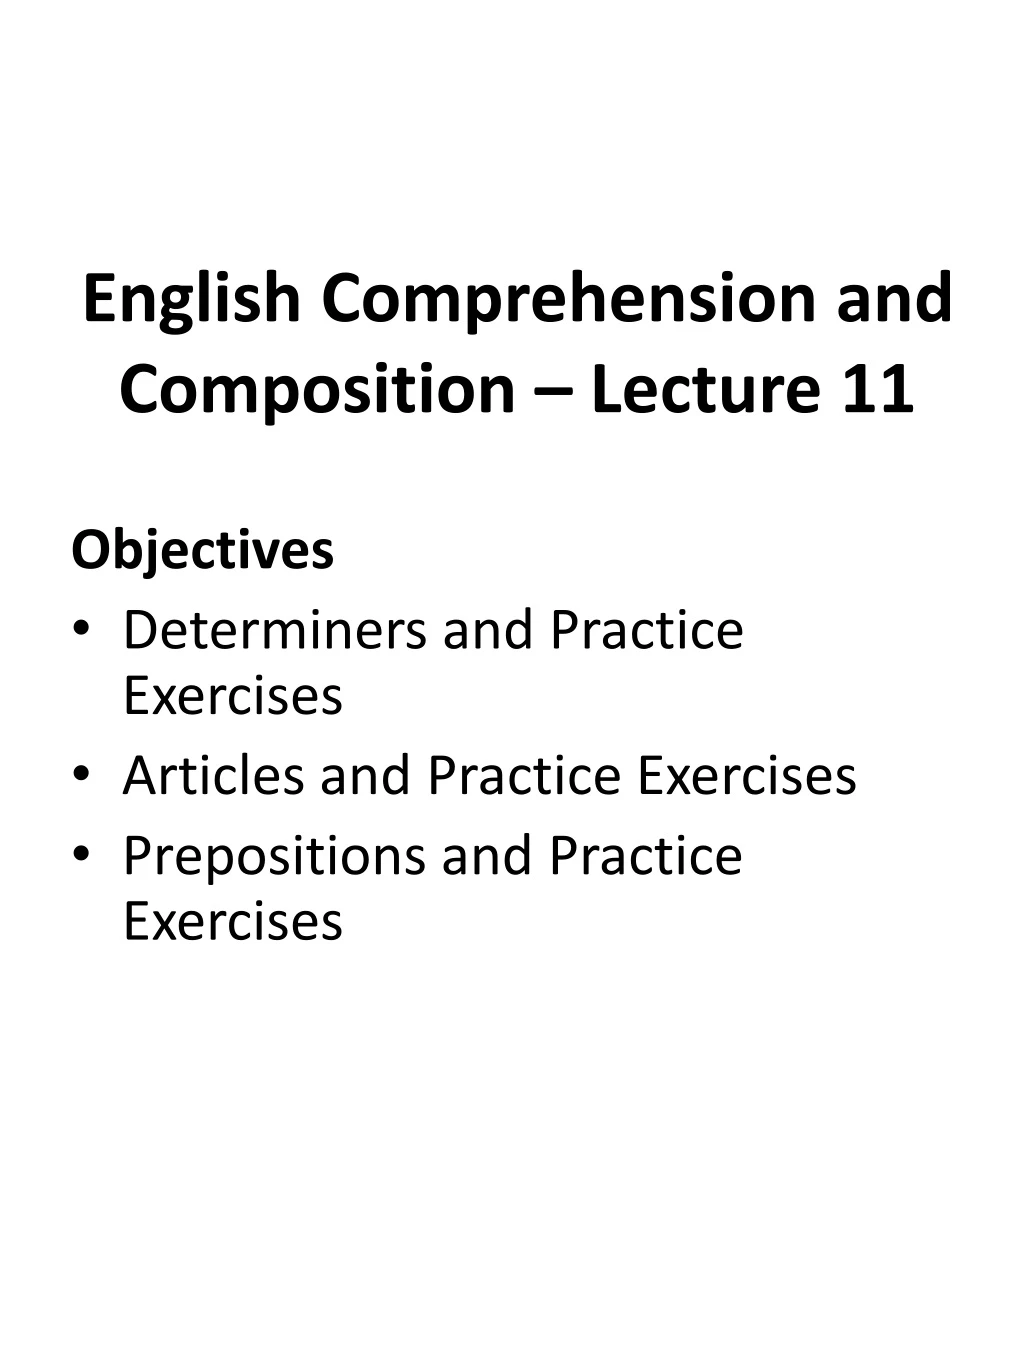 english comprehension and composition lecture 11